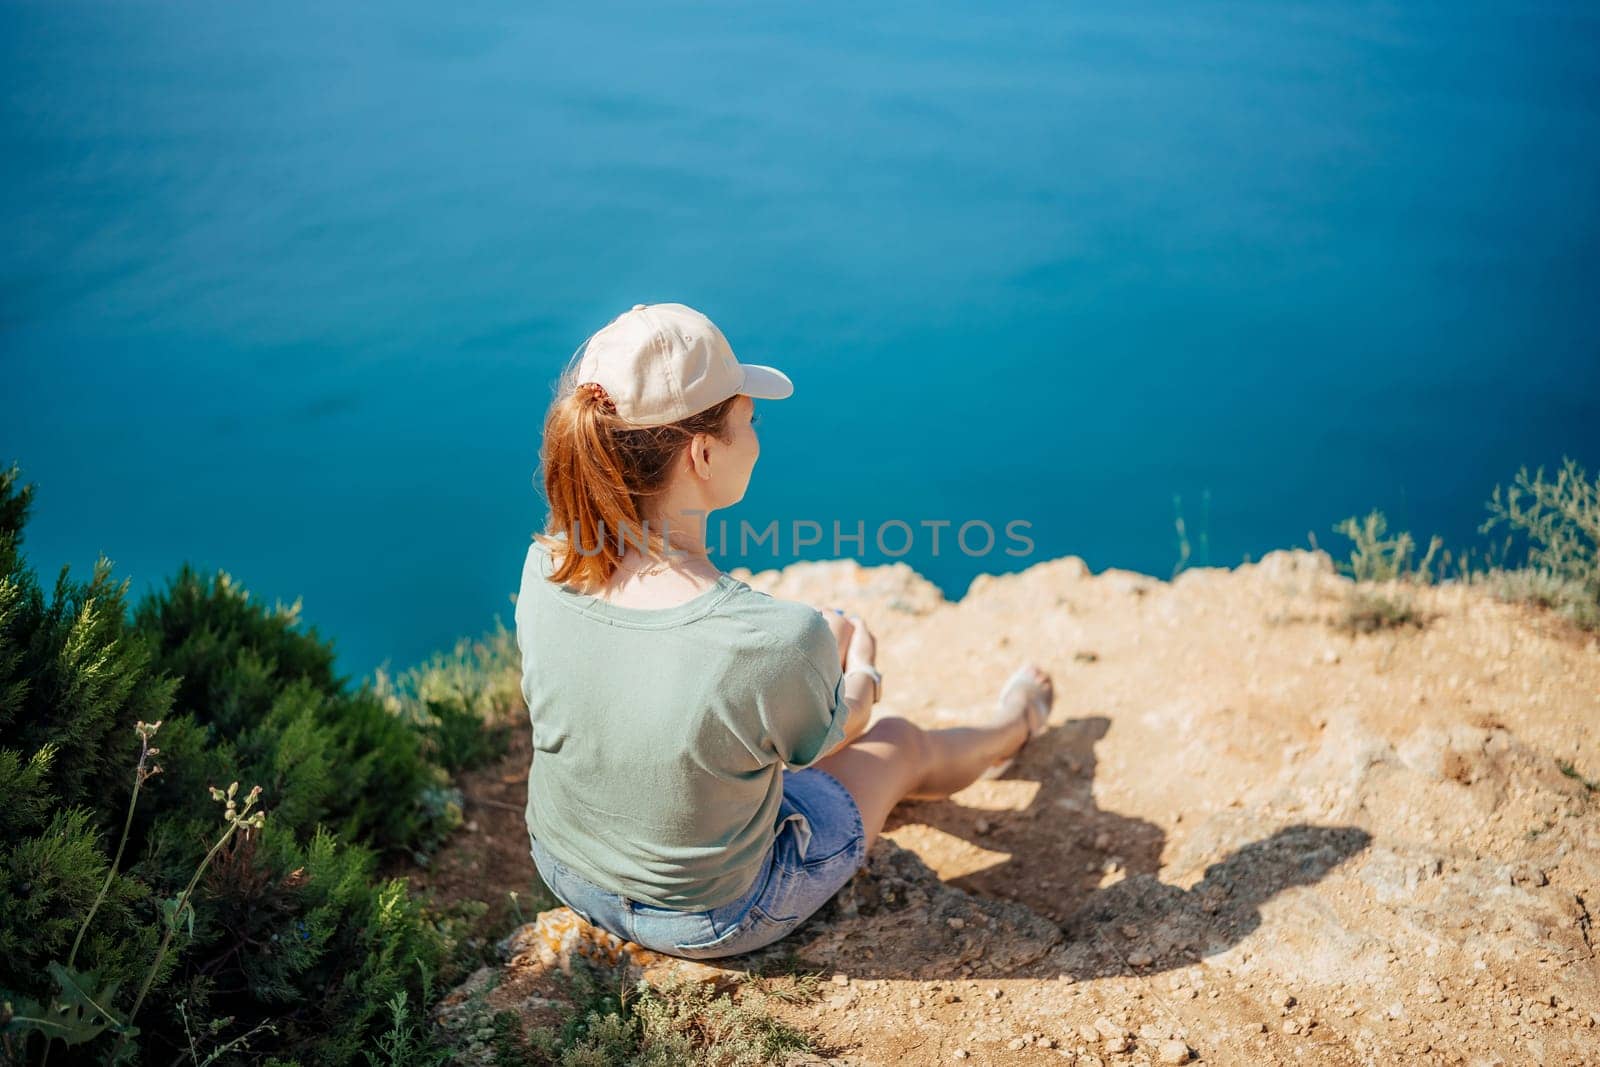 A woman is sitting on a rock overlooking the ocean. She is wearing a hat and a green shirt